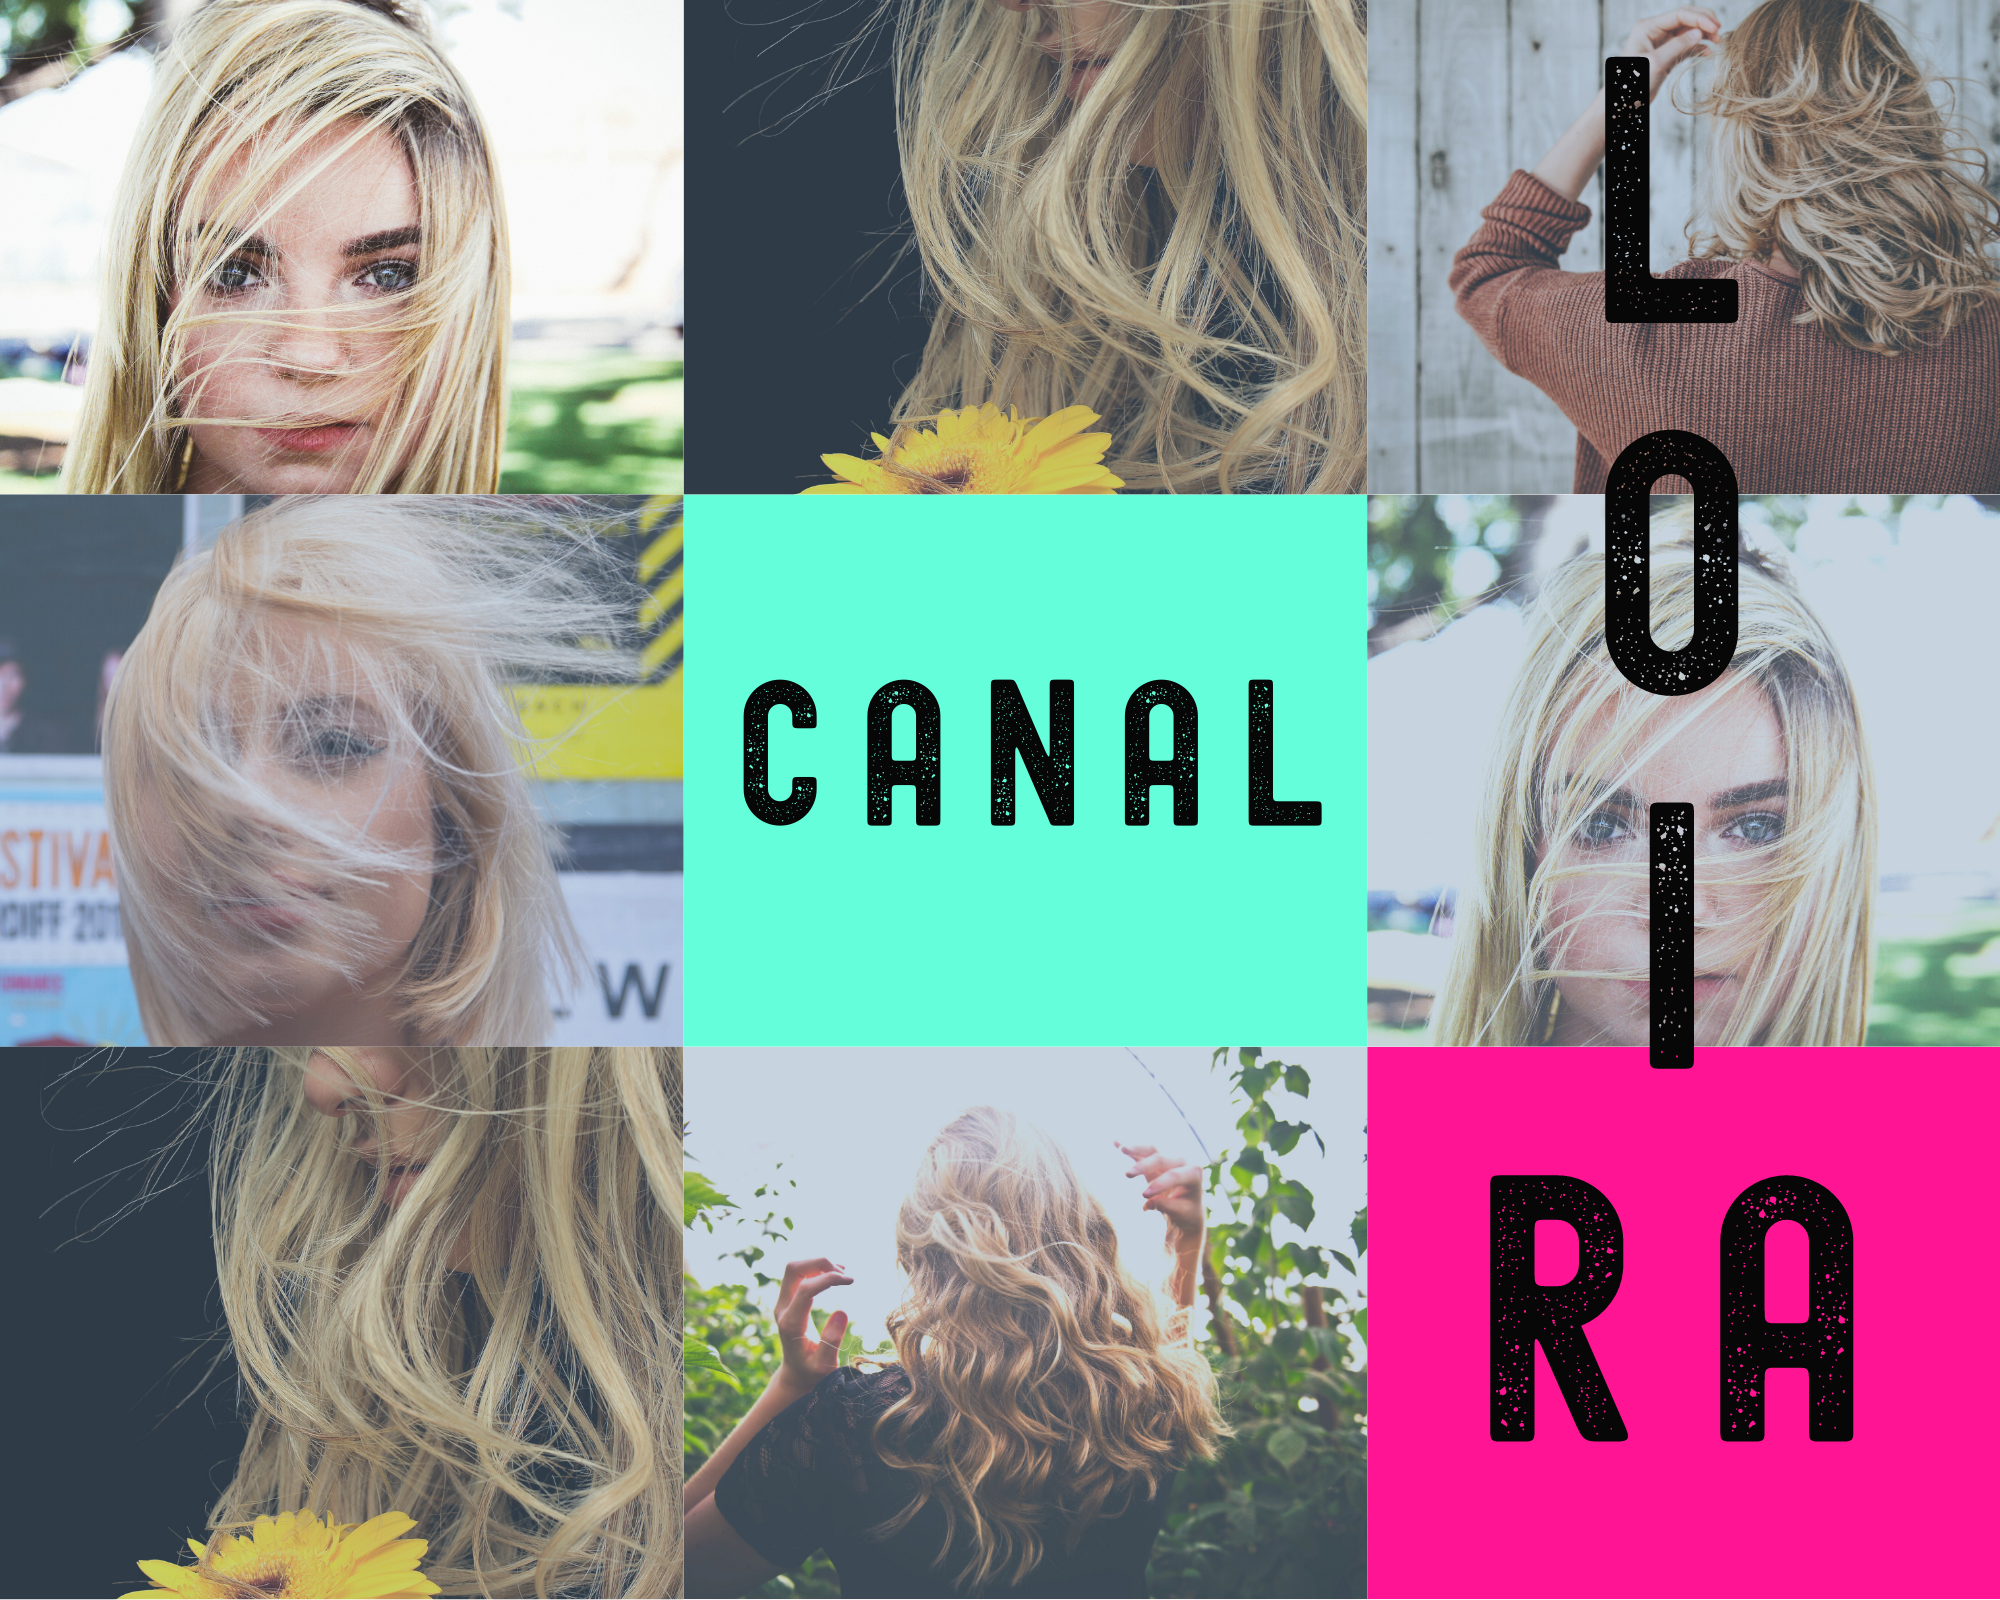 Start Your Day1 - Canal Cortes de Cabelo